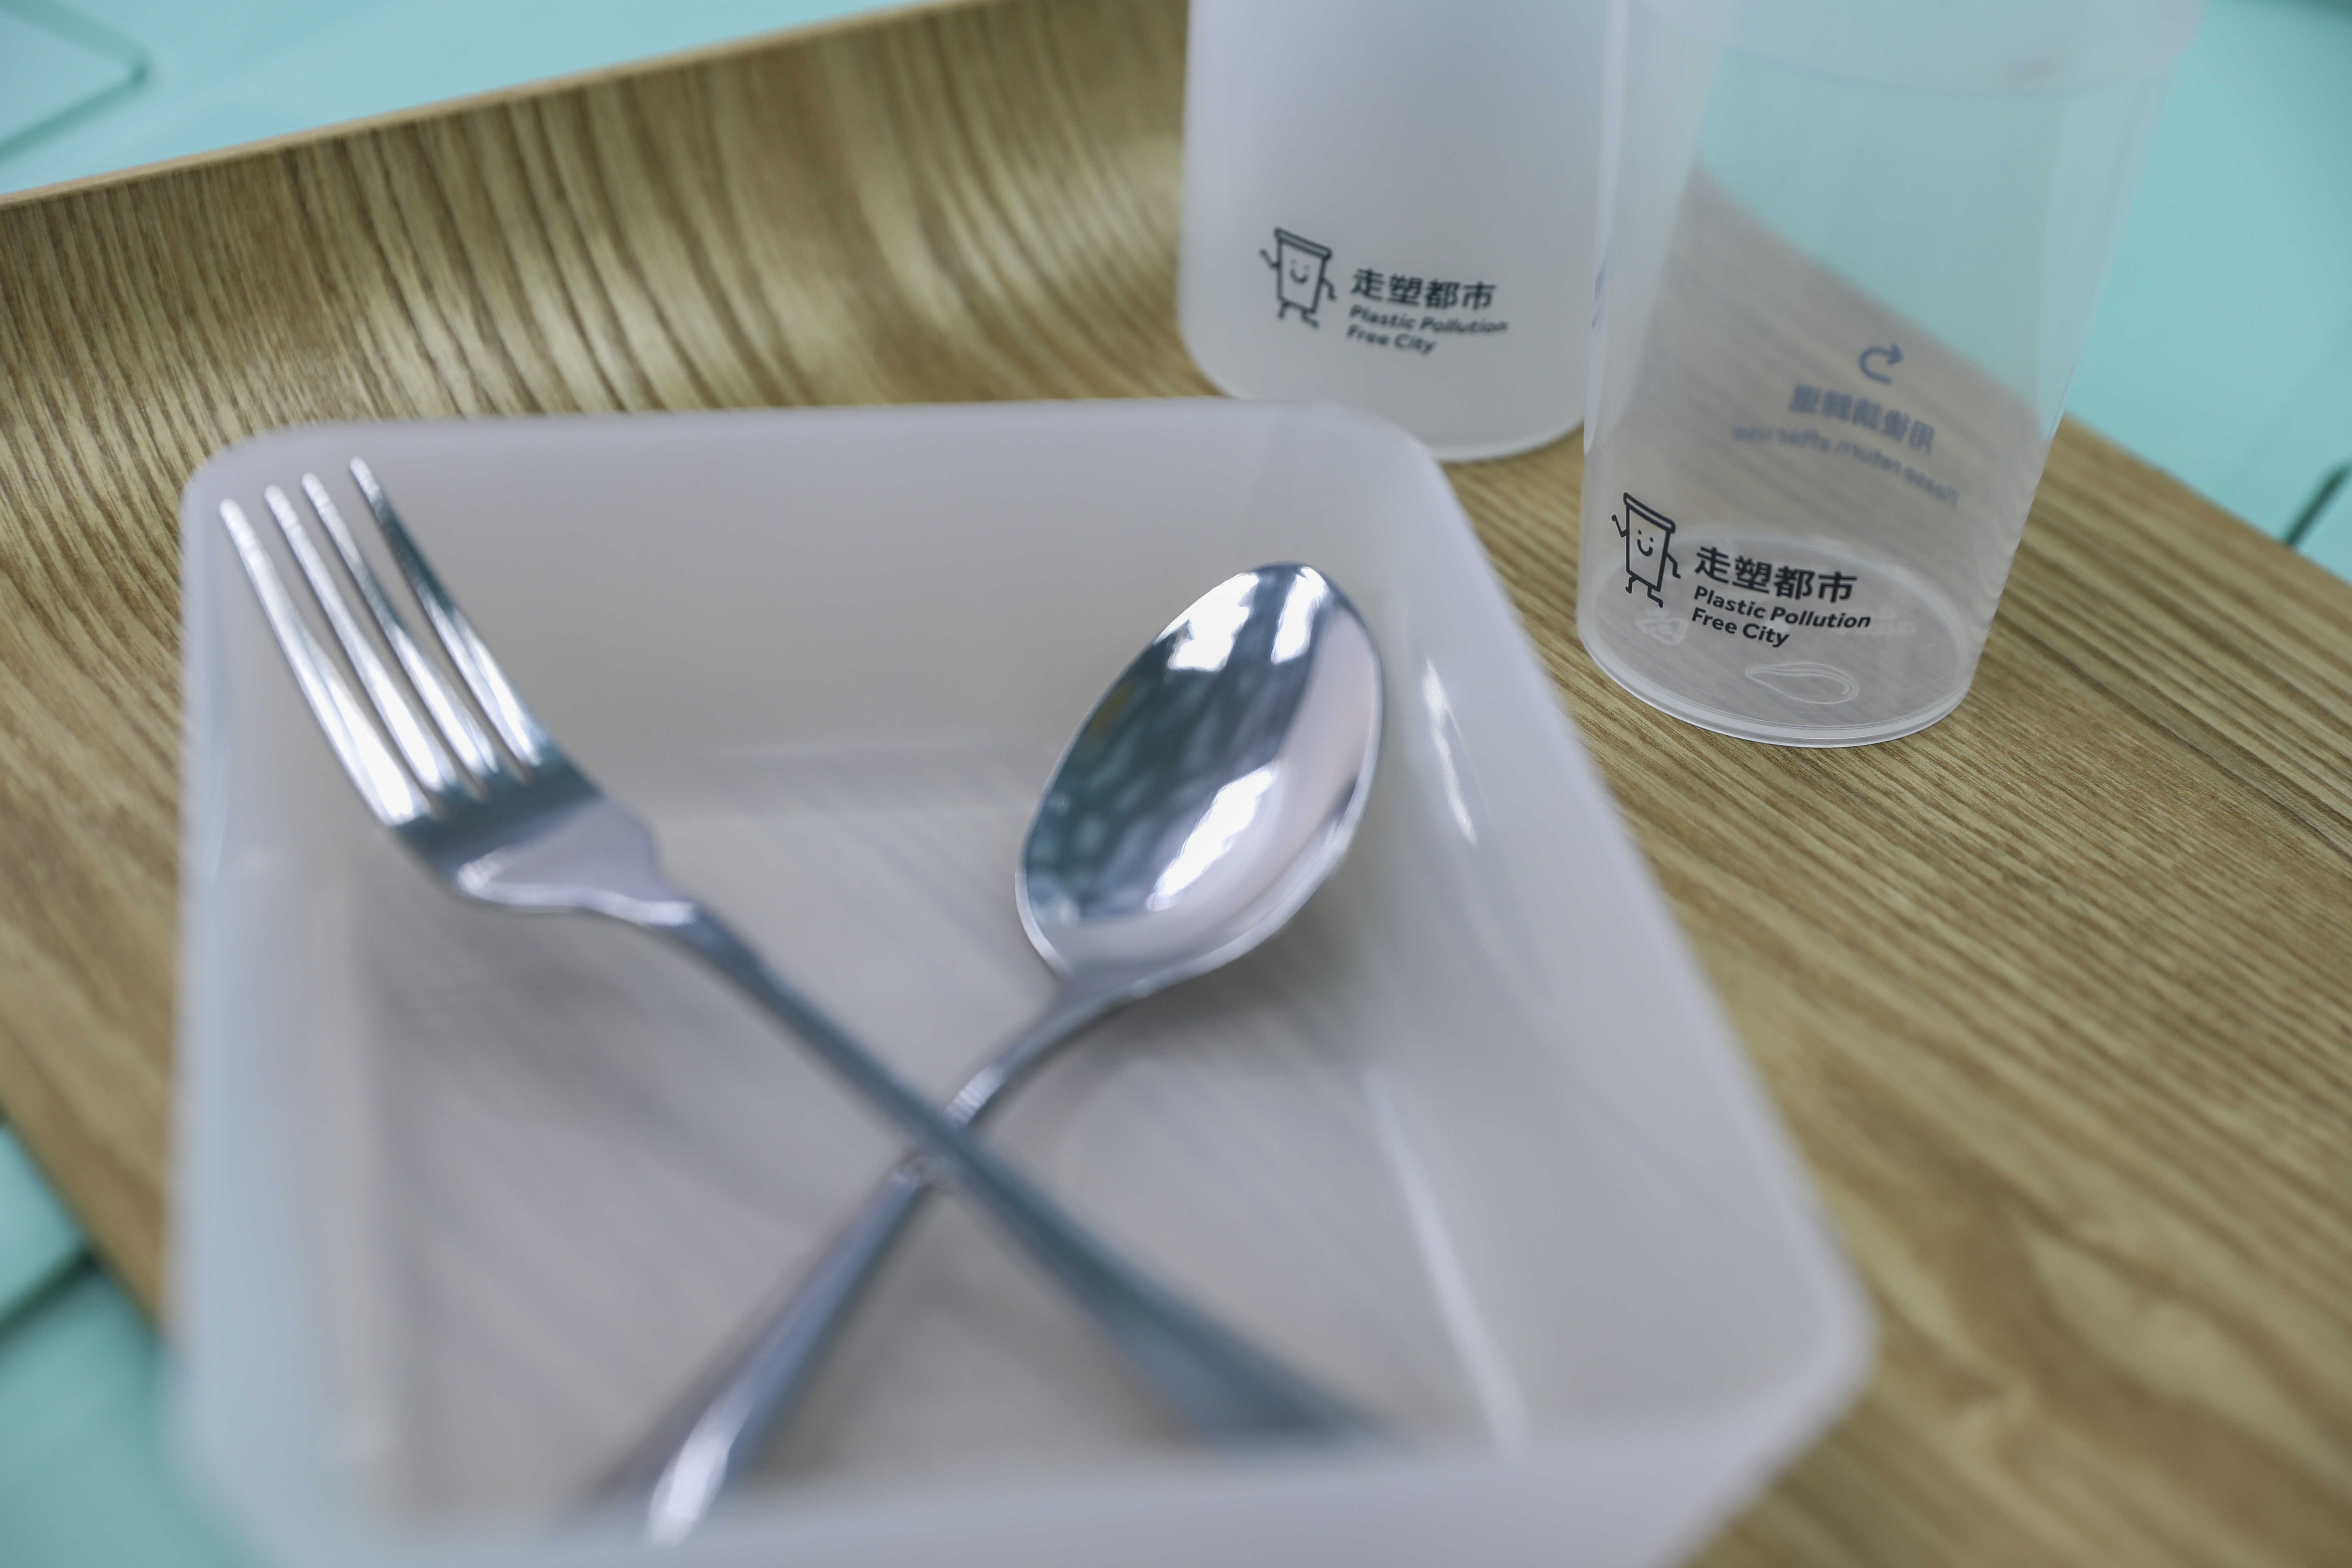 We-Use’s tableware sets, mostly ceramic and glass, were rented out 270,000 times last year. Photo: Sam Tsang